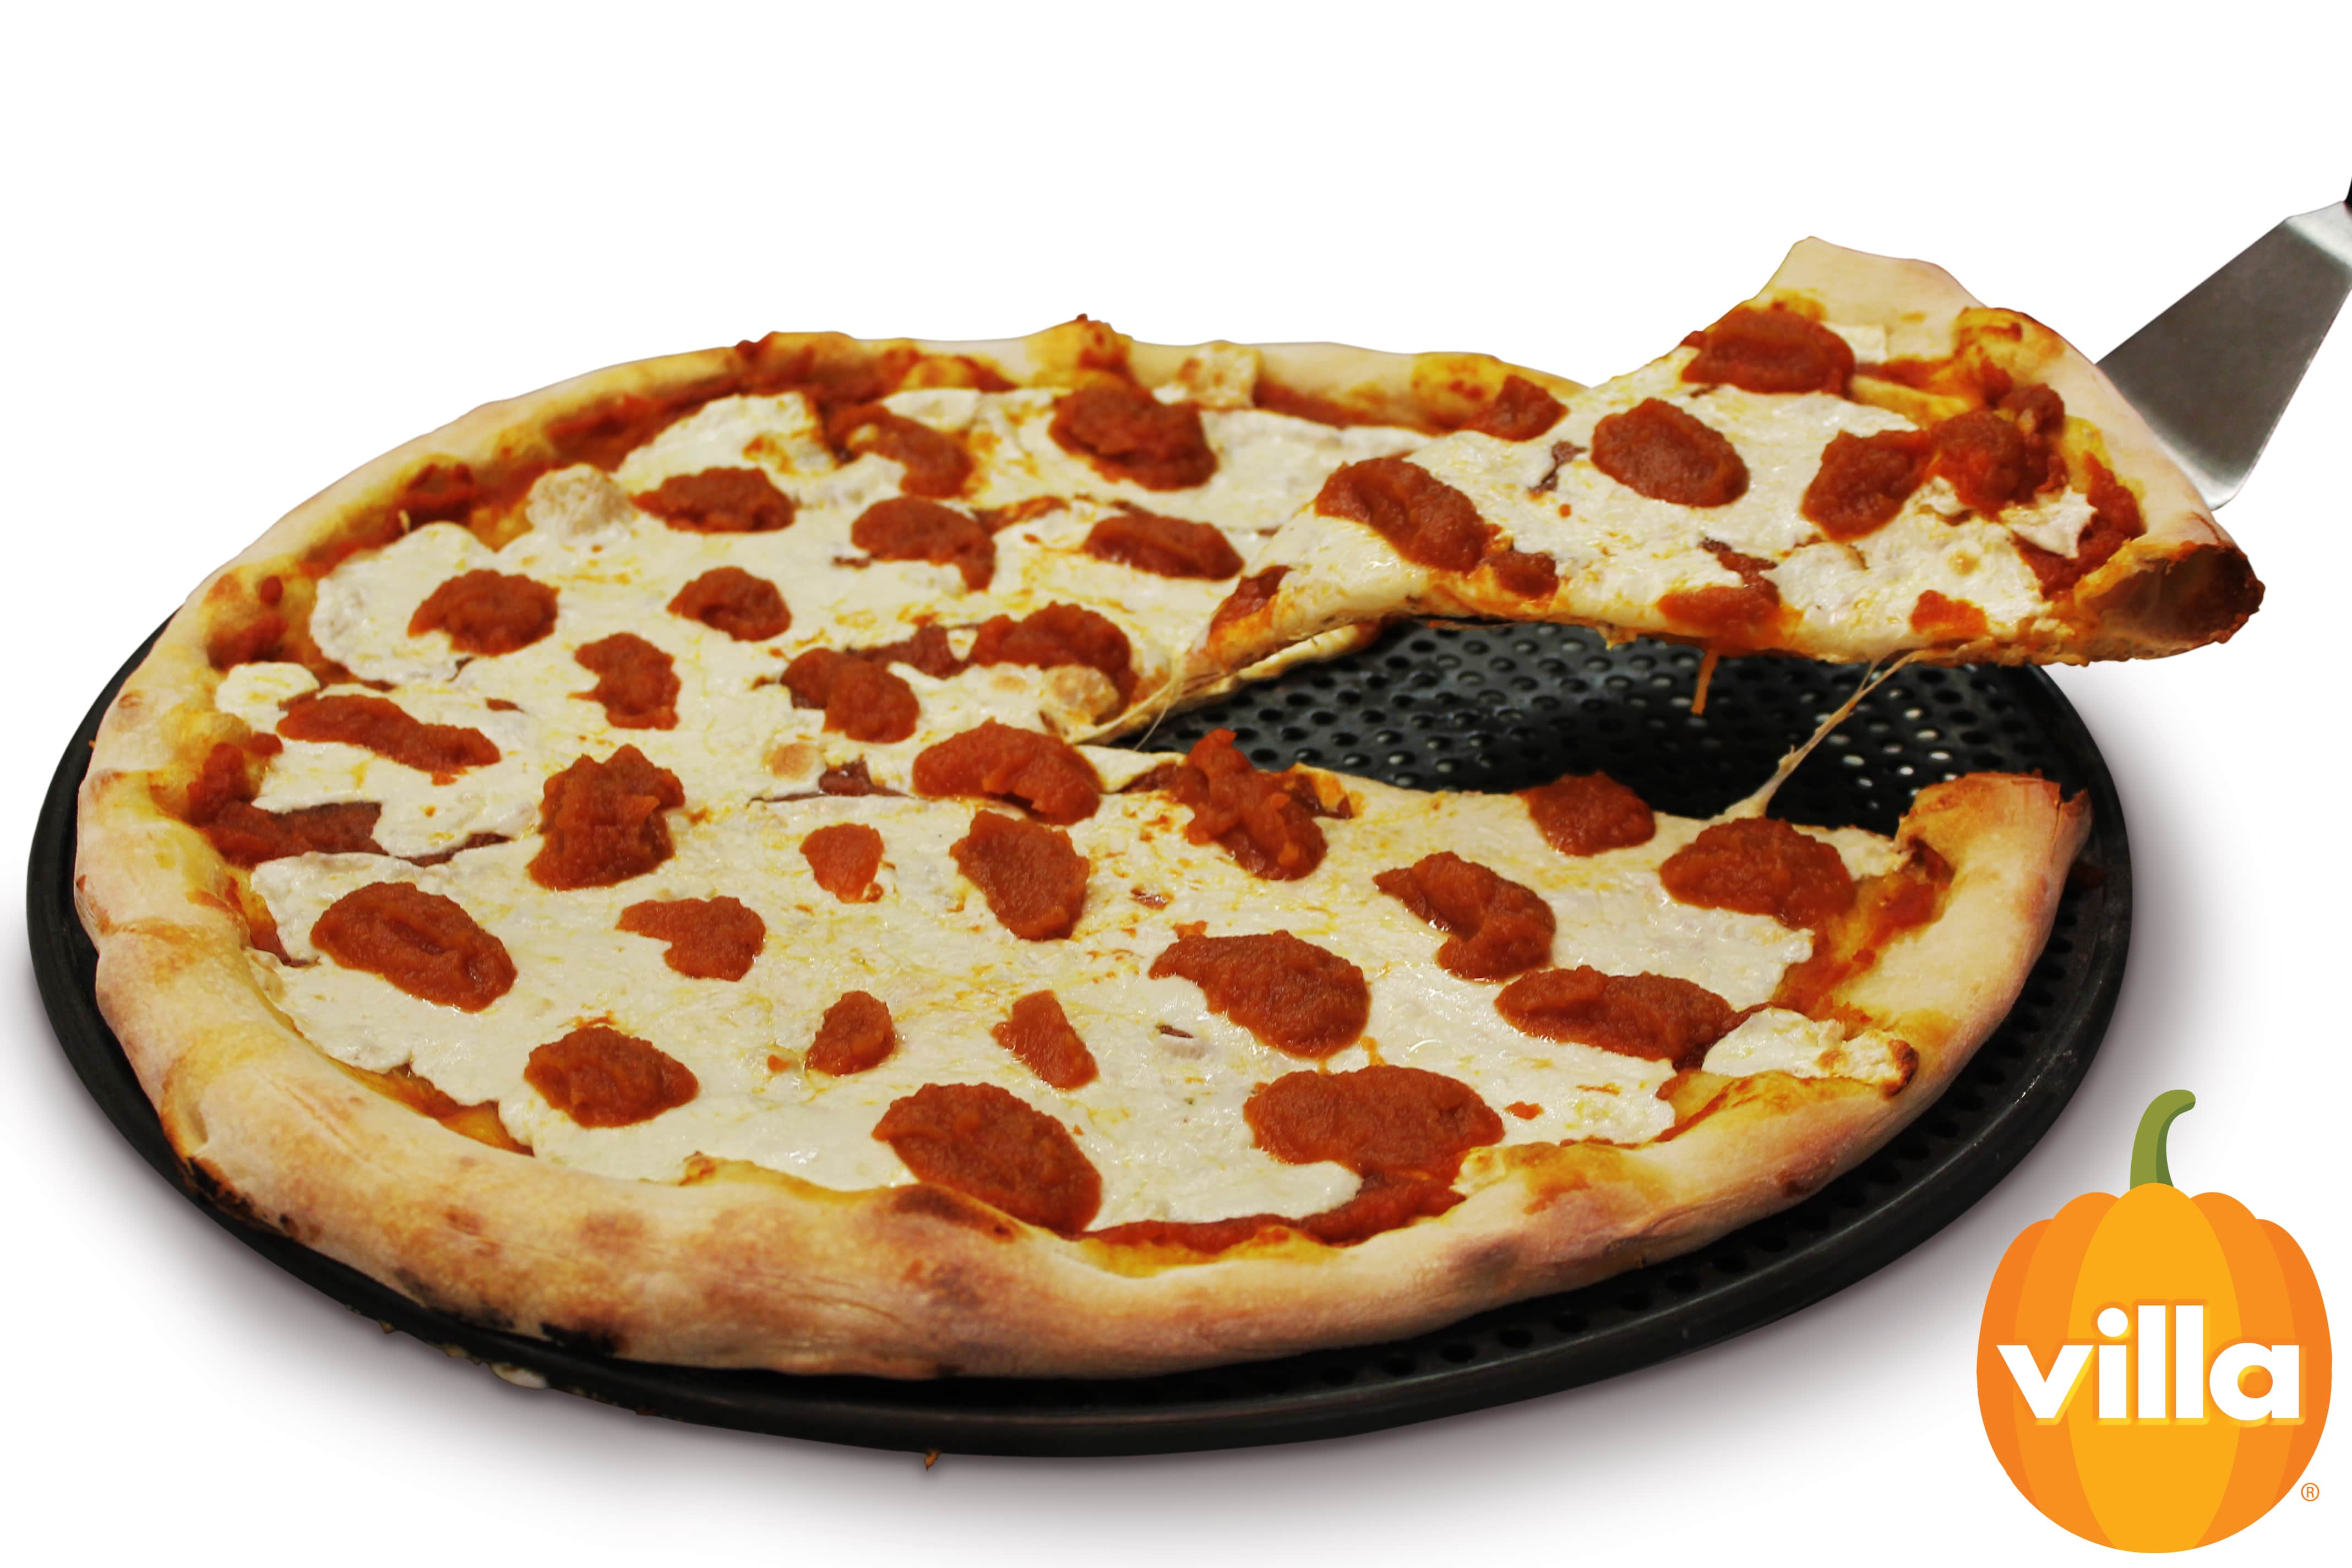 Best Food & Bev campaign: BMLPR spices up client’s visibility for new pumpkin pizza